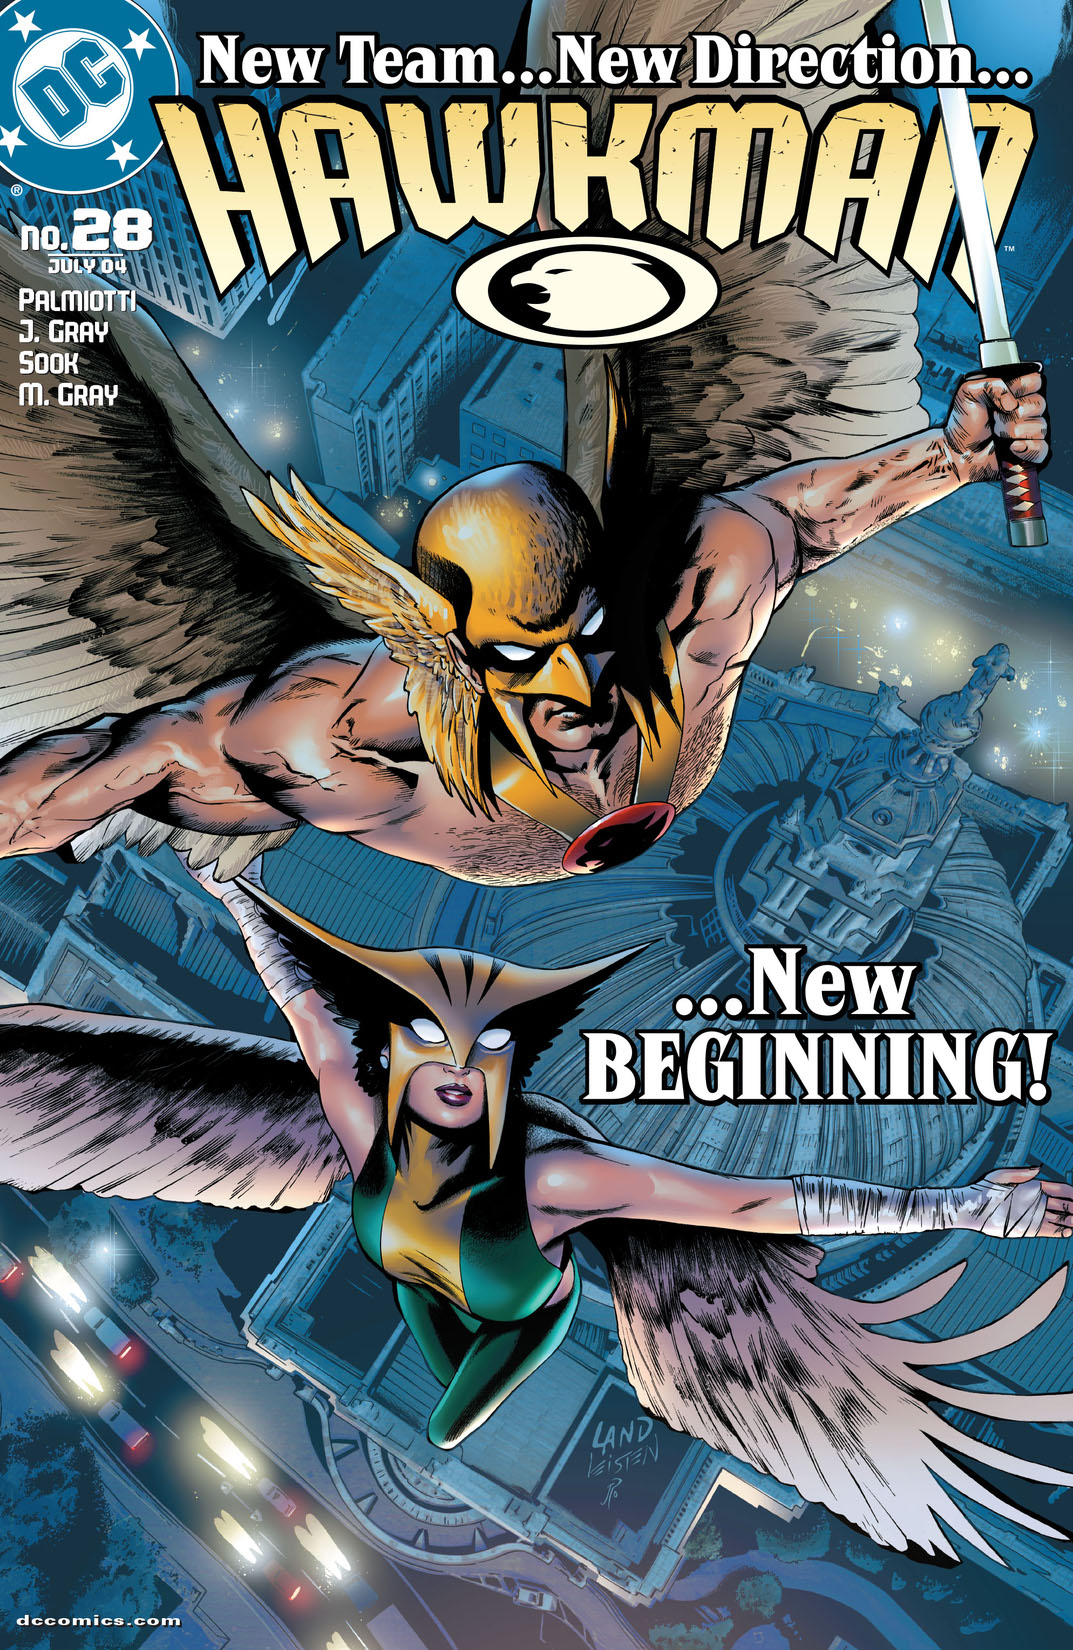 Hawkman (2002-) #28 preview images